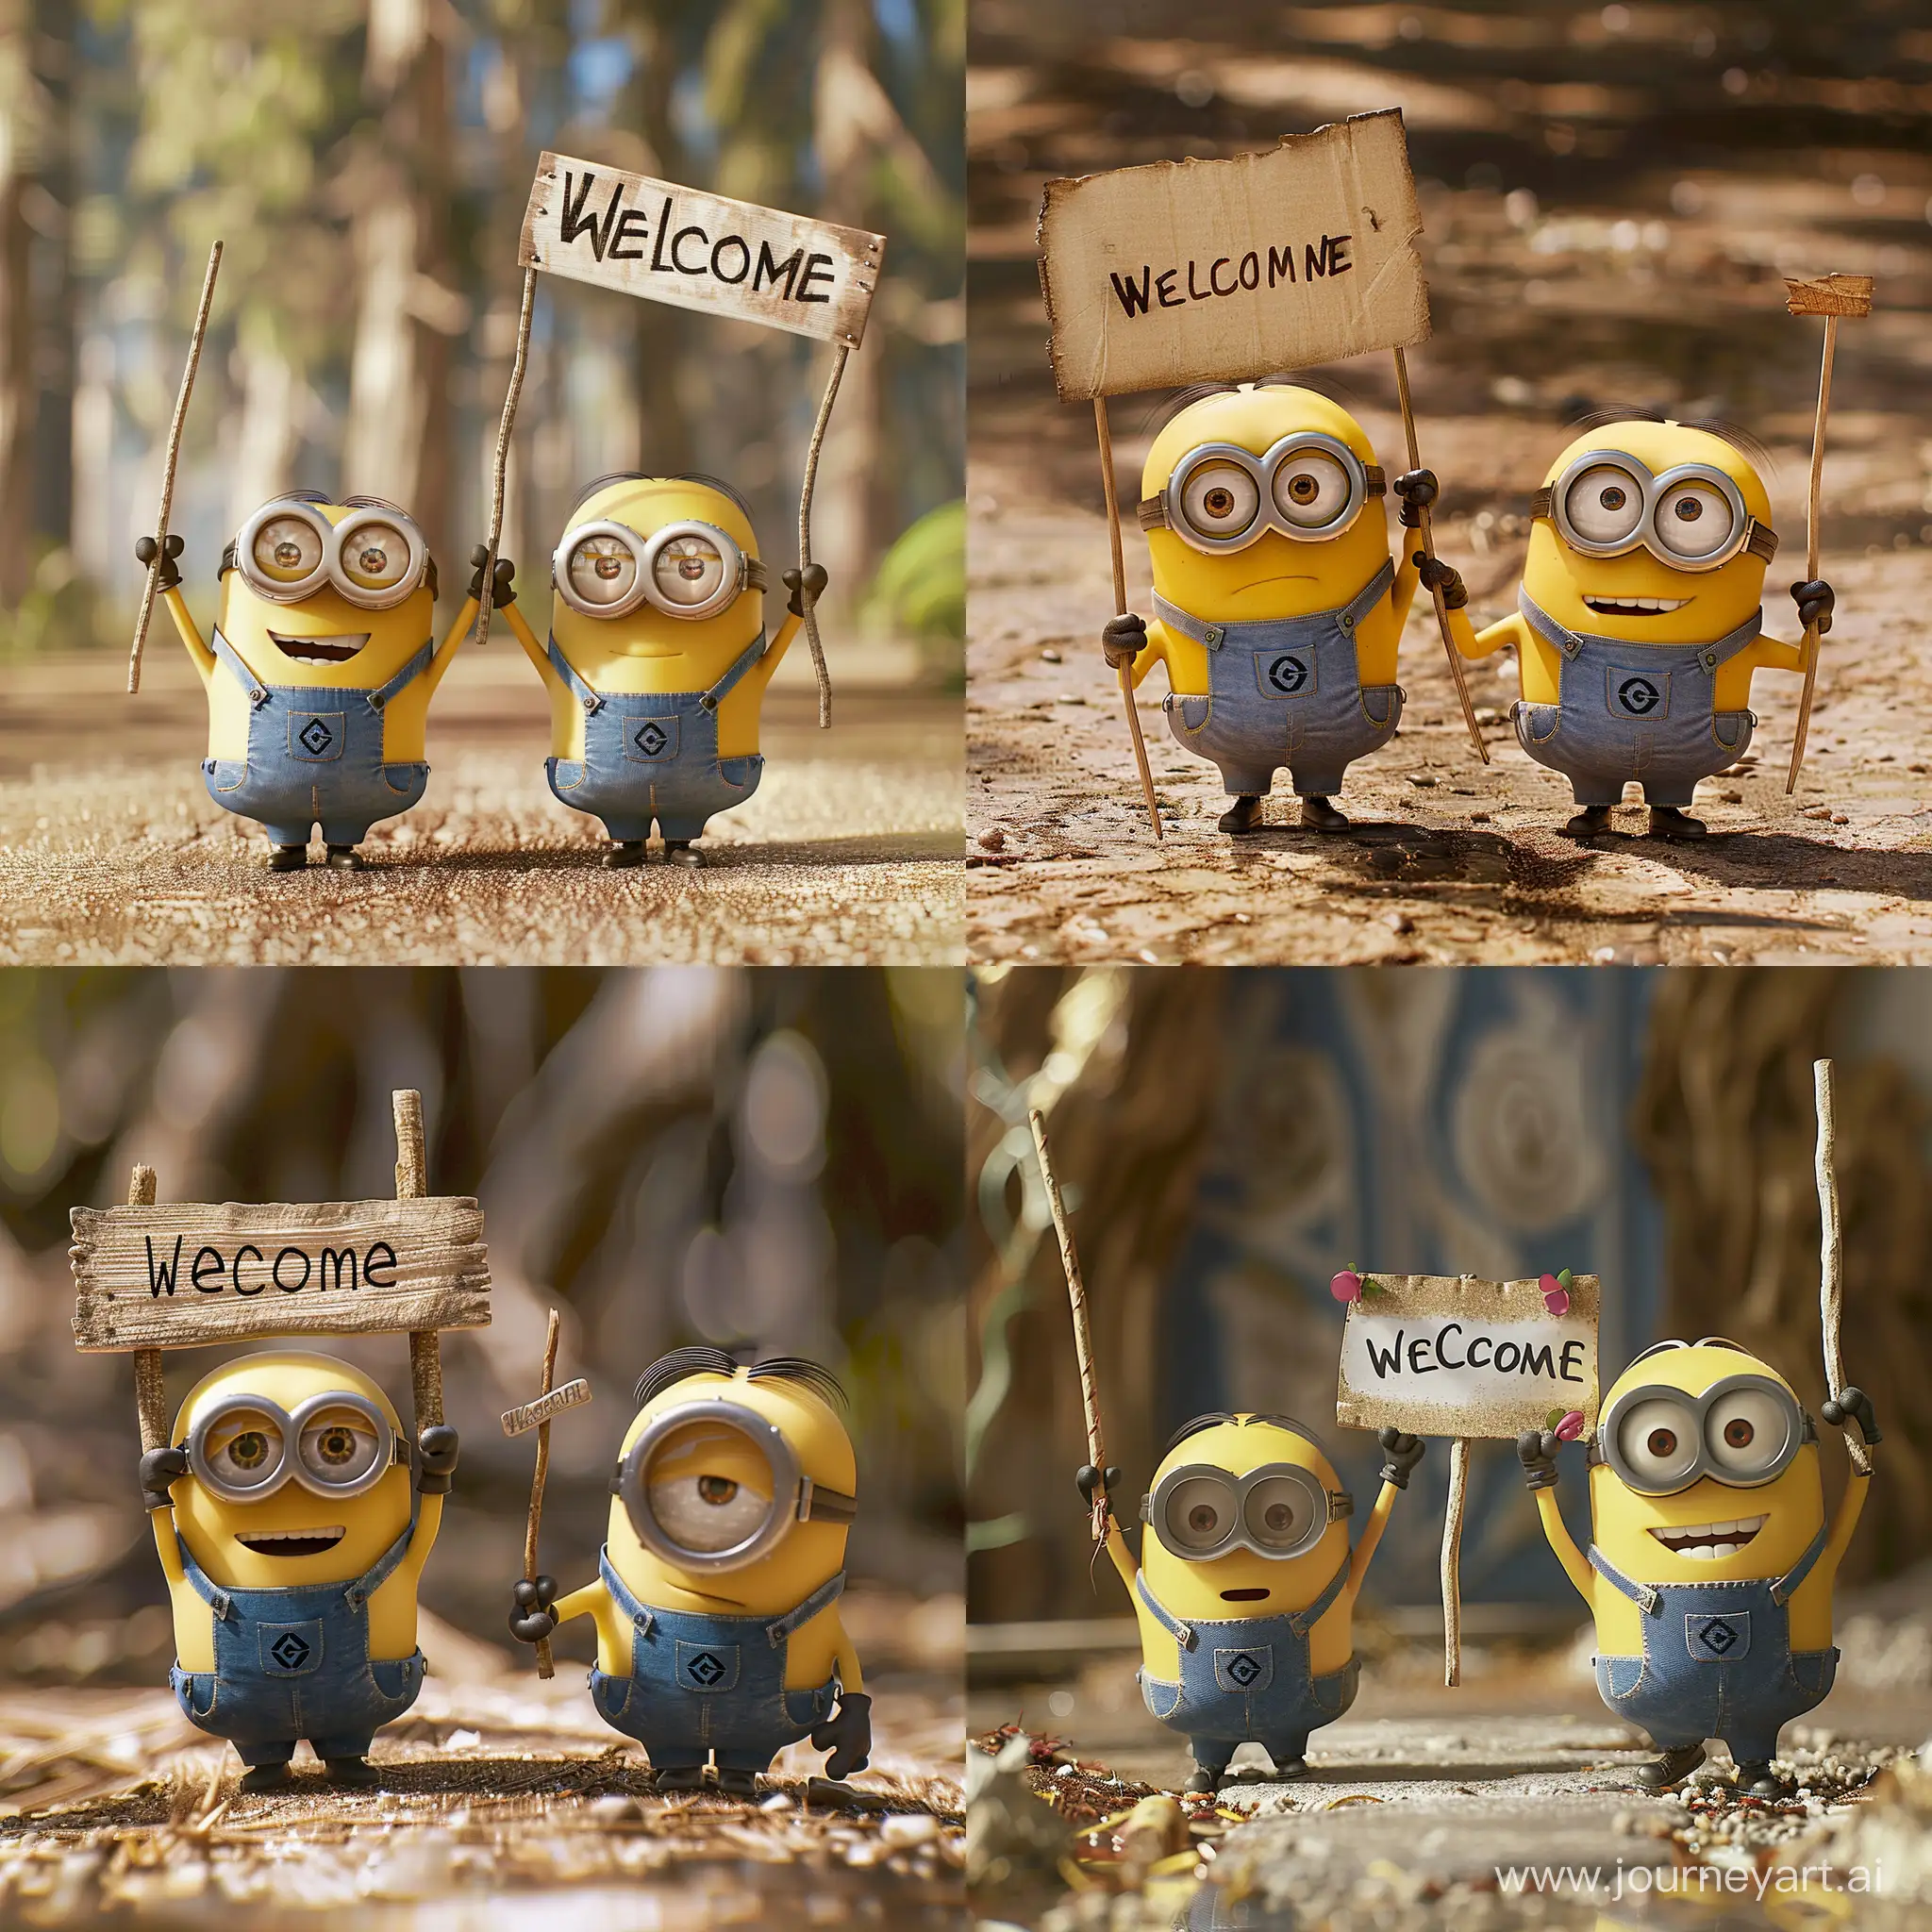 Cheerful-Minions-Welcoming-Guests-with-a-Sign